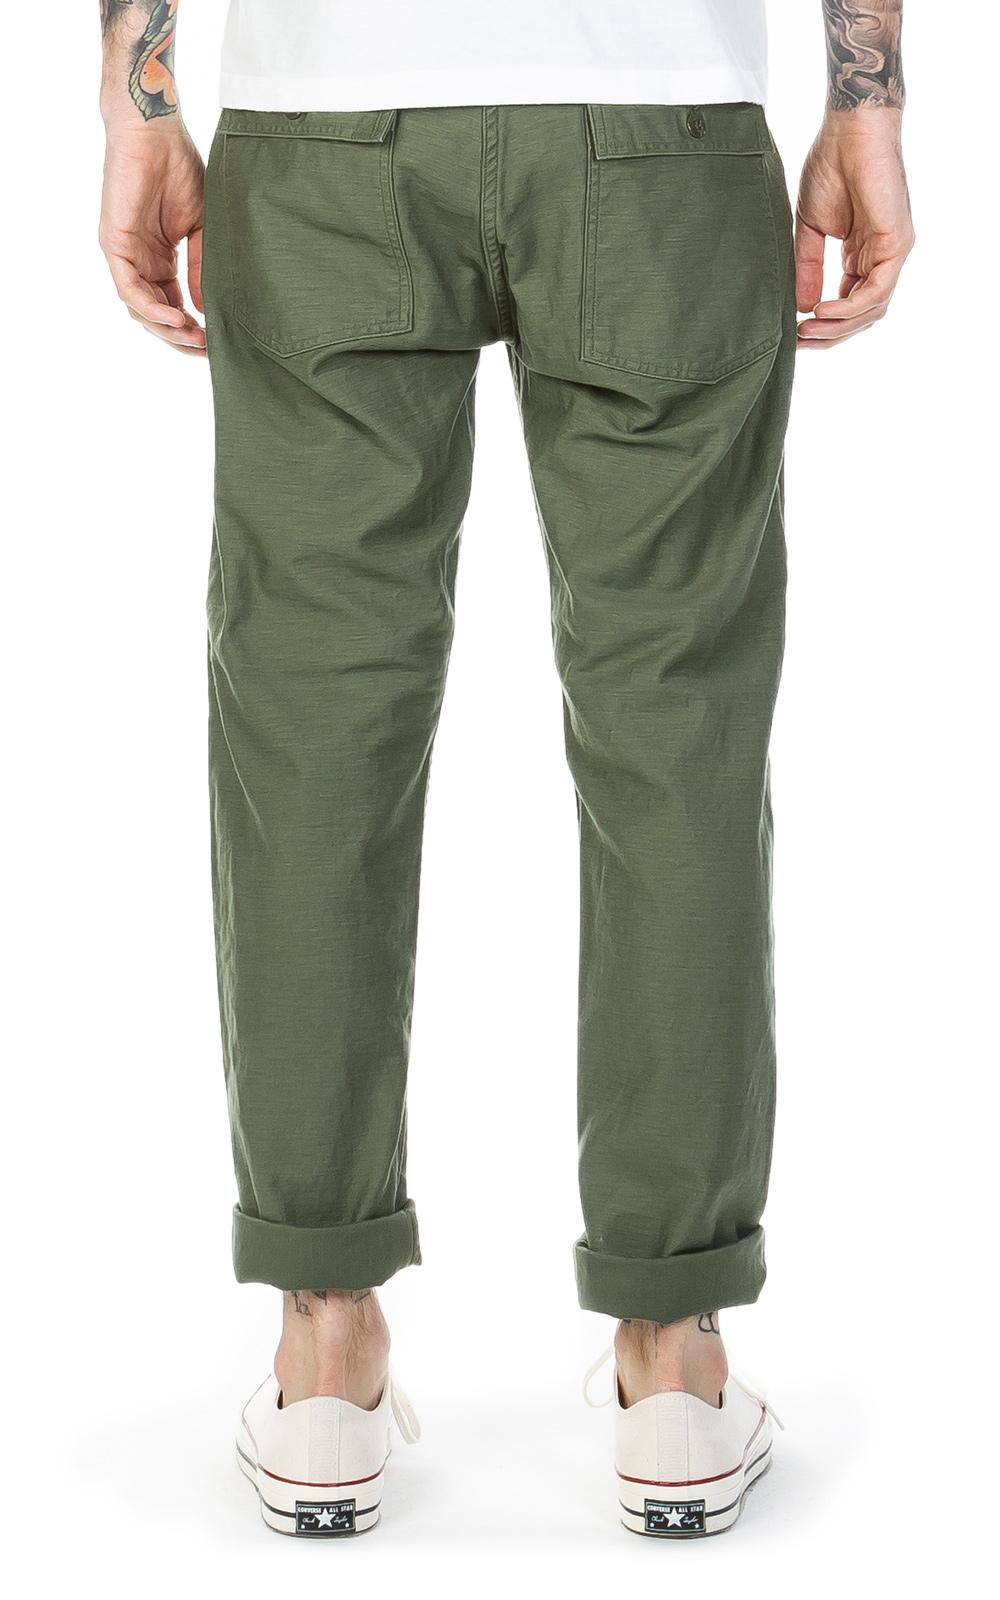 Army Fatigue Pants For Men - Army Military